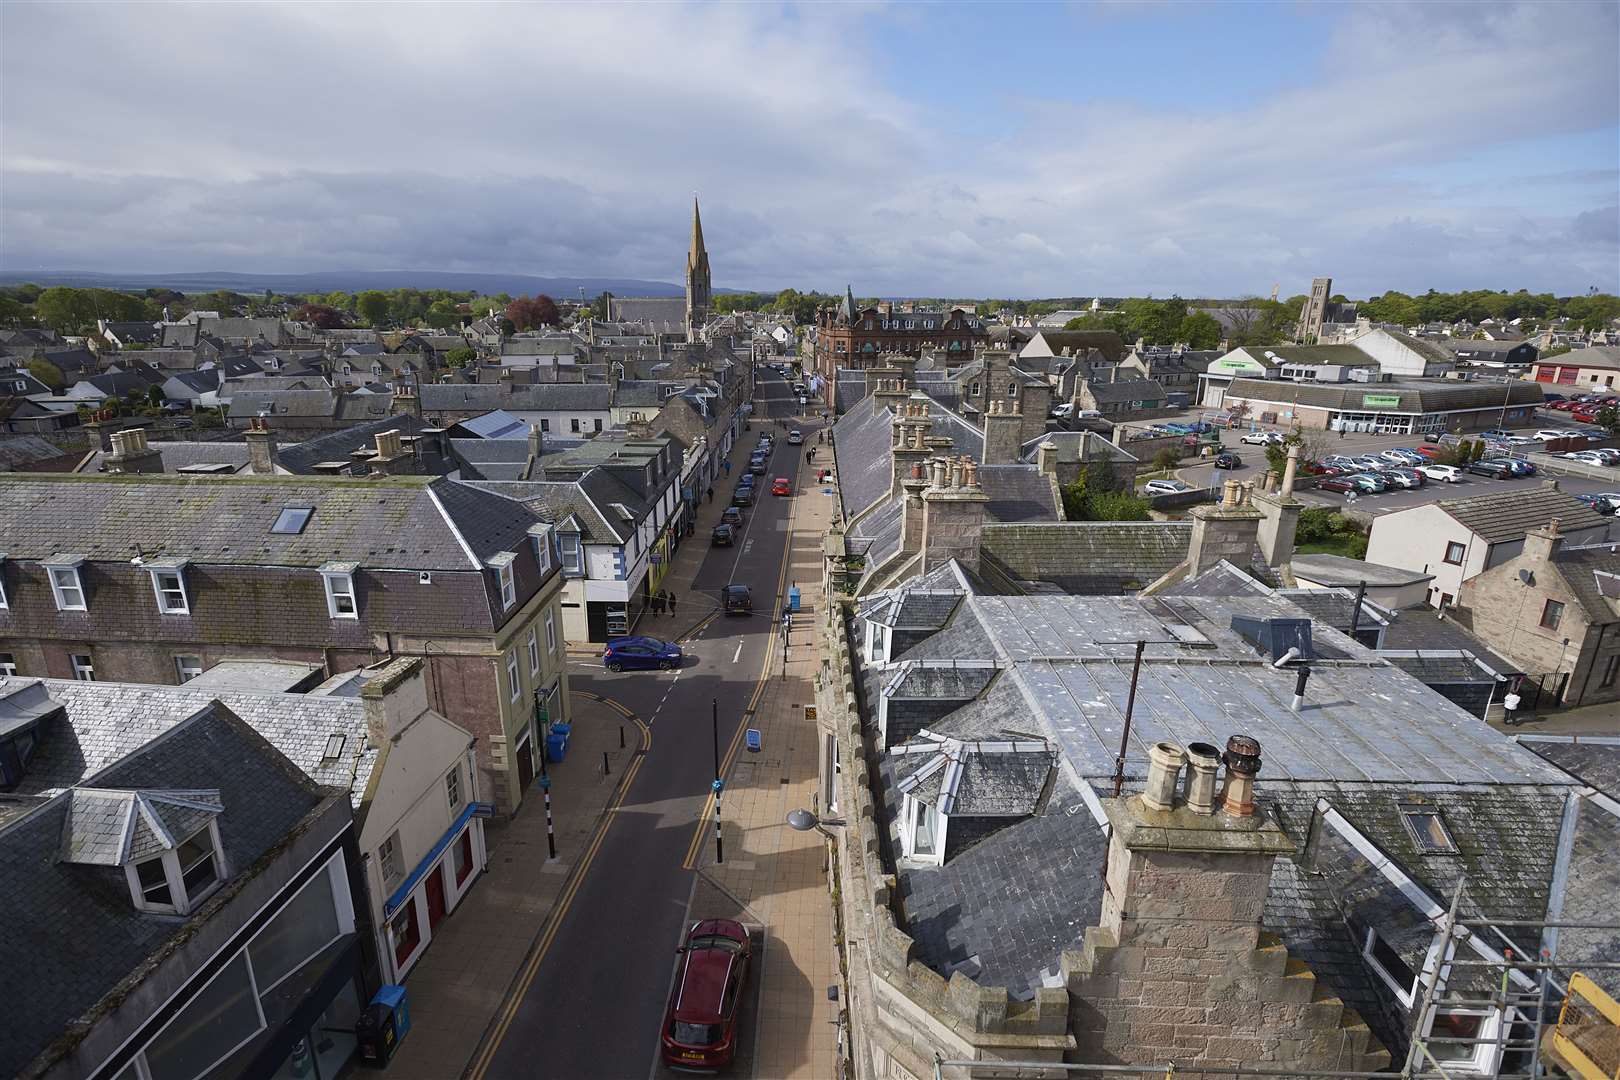 View of Nairn from the courthouse steeple.